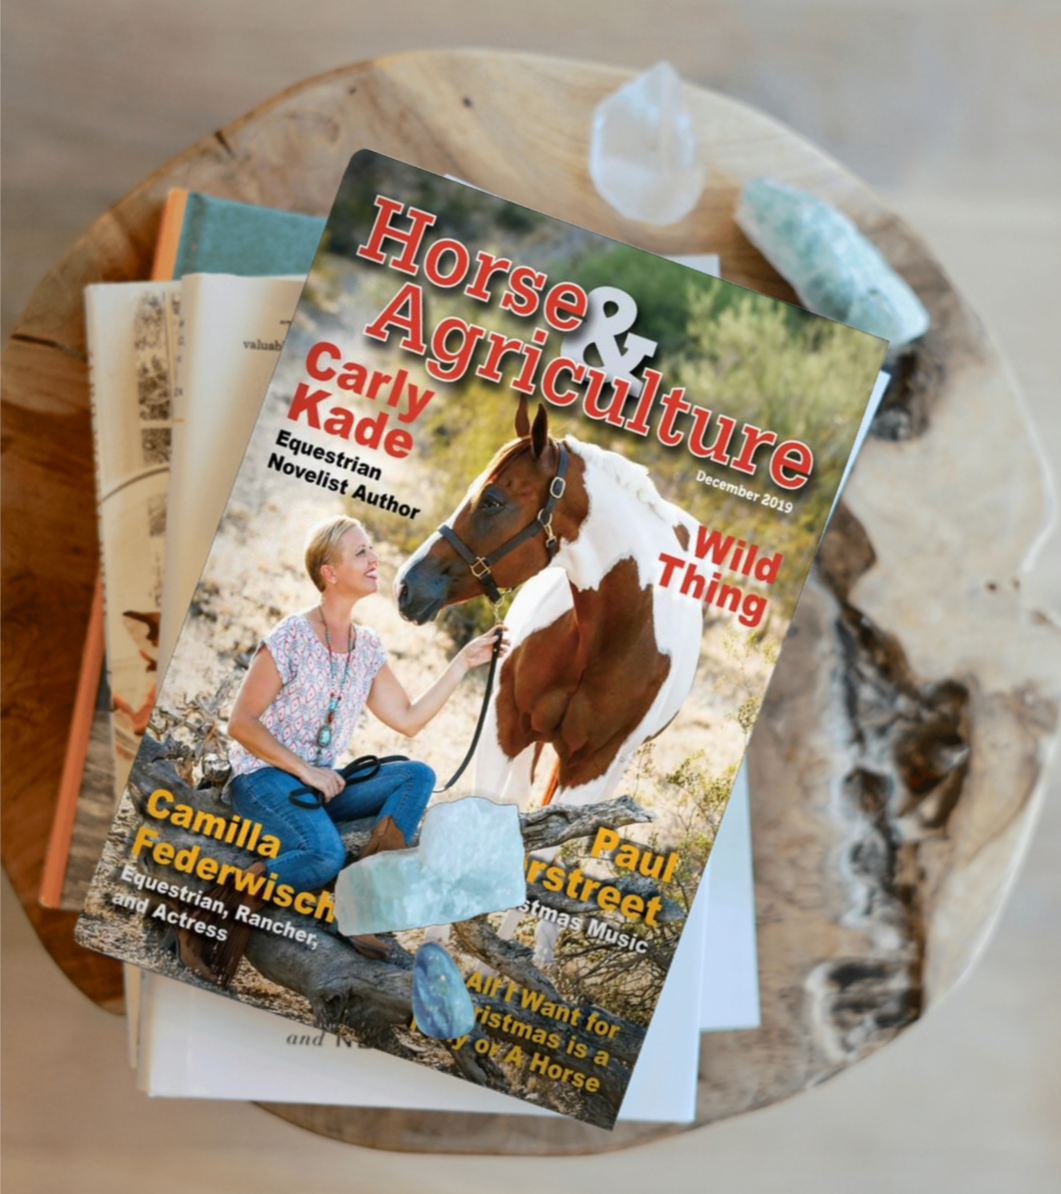 Carly Kade on the cover of Horse & Agriculture Magazine